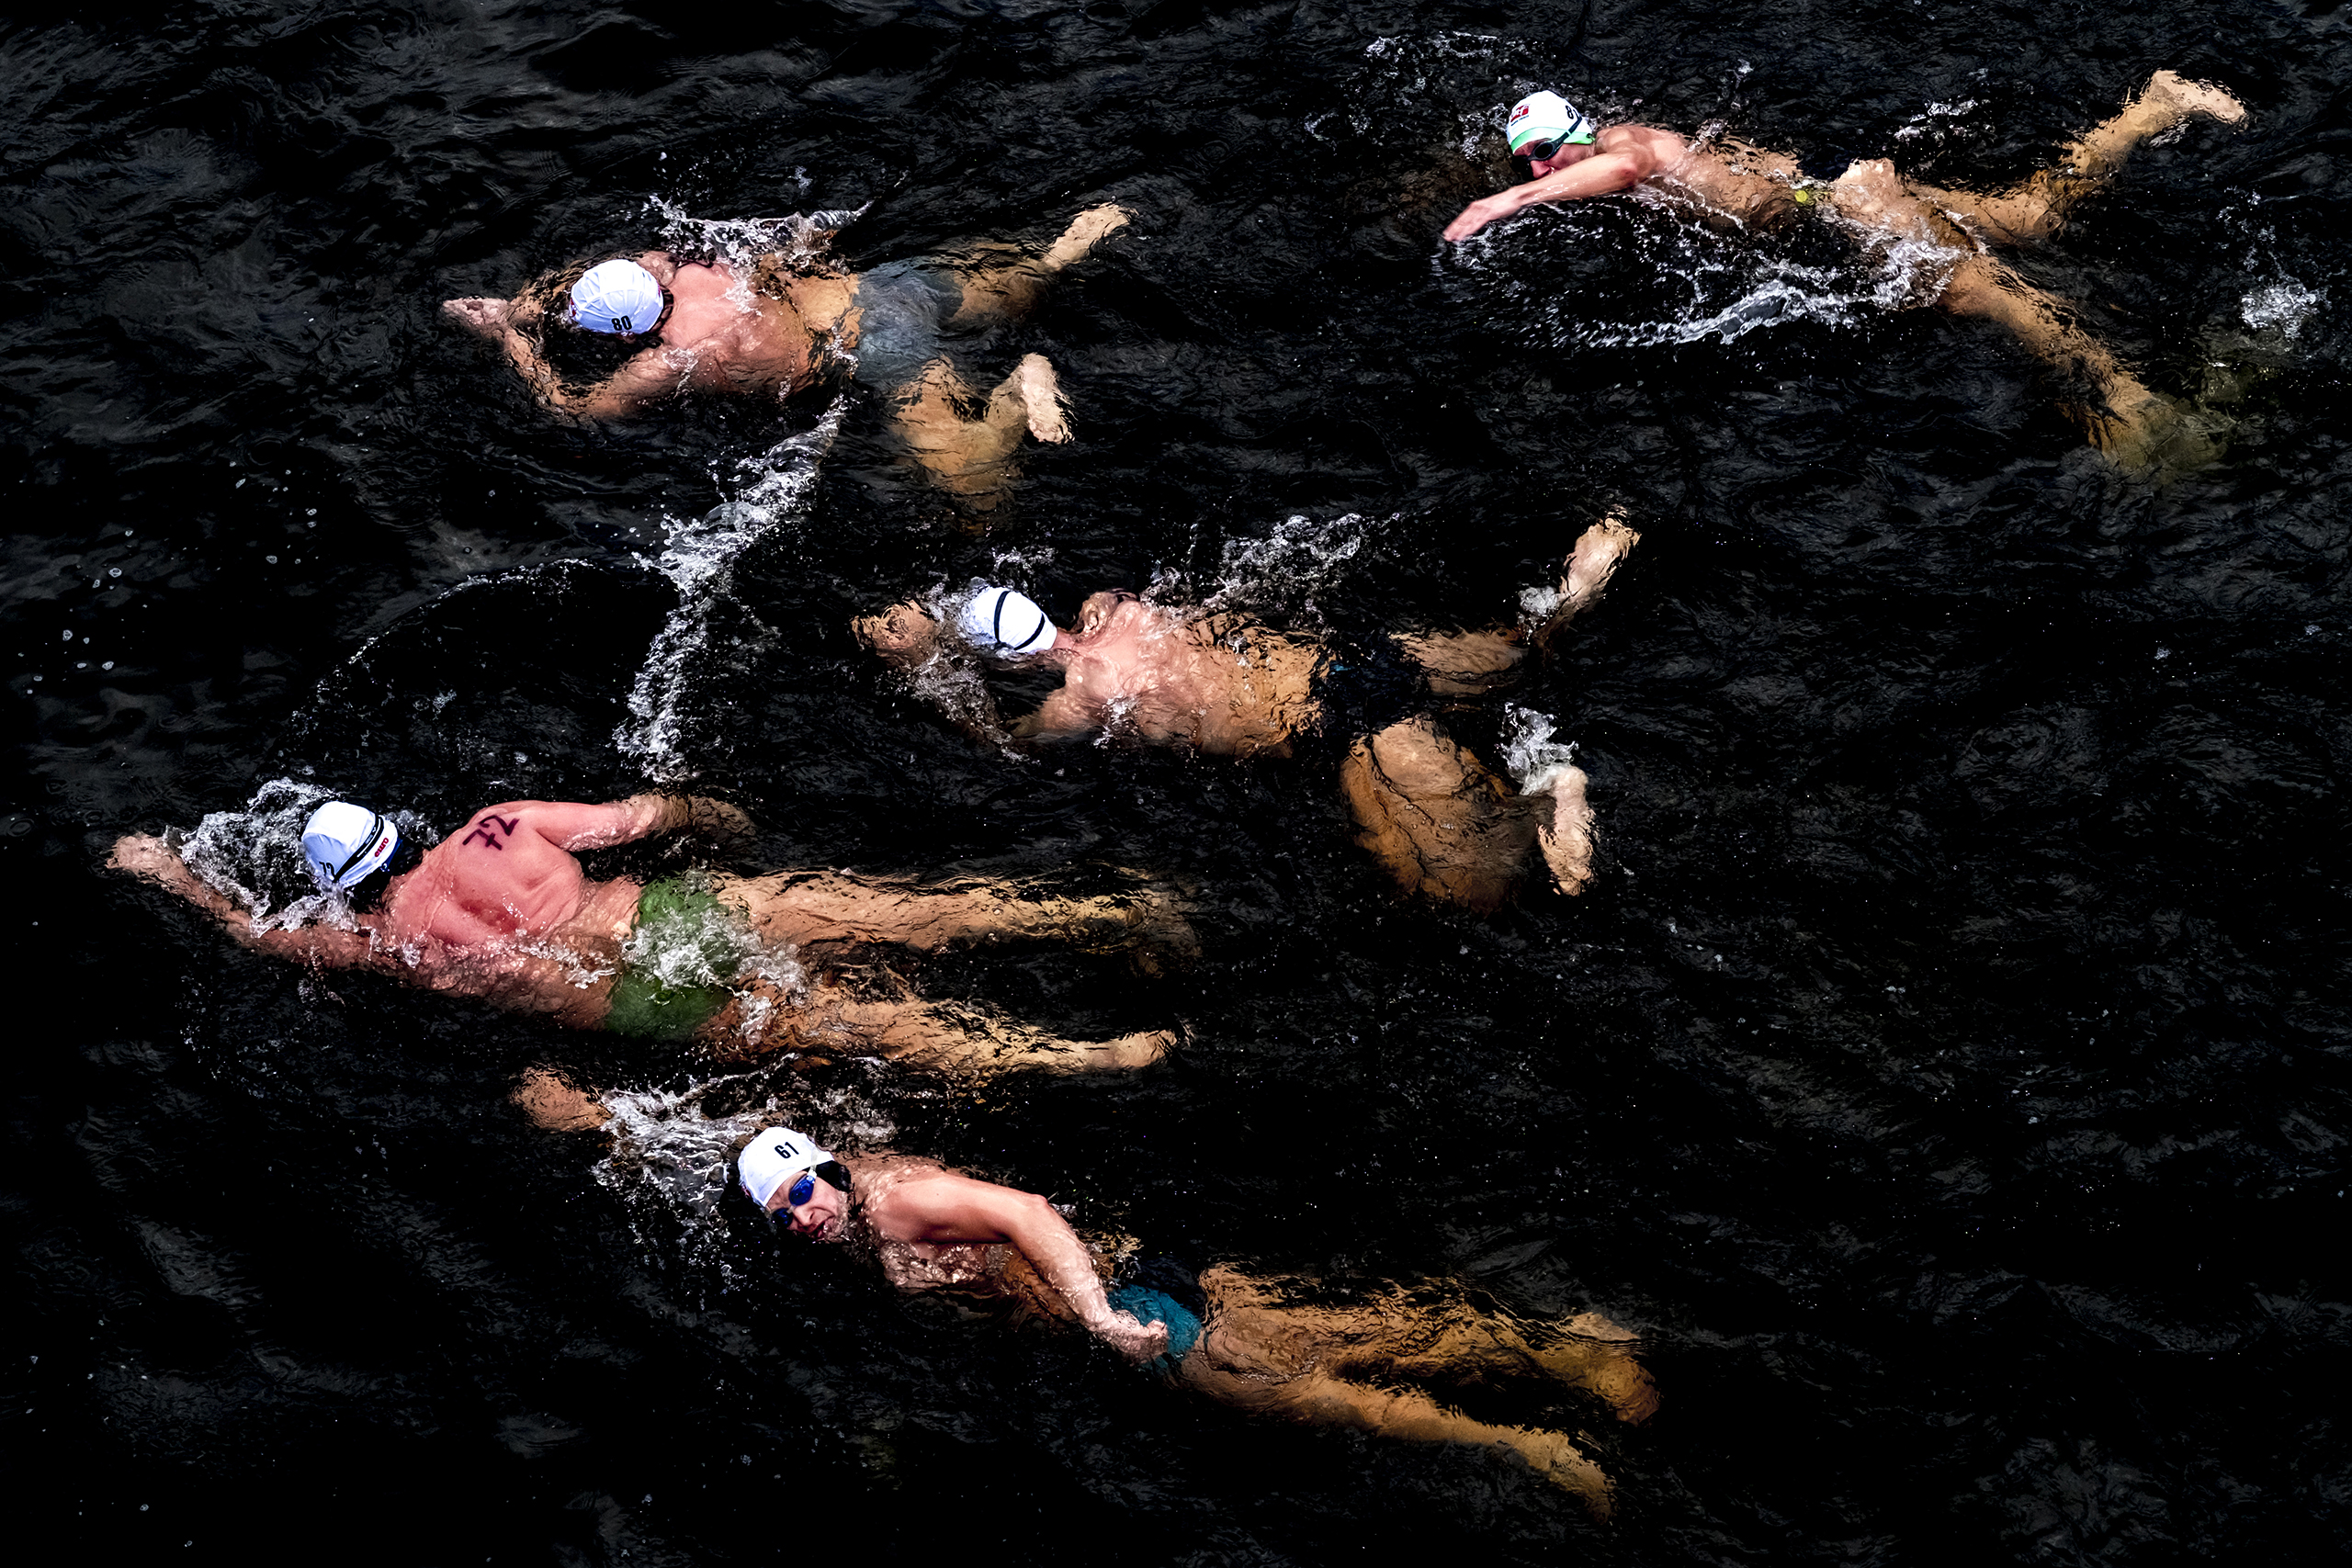 A group of swimmers take part in a Boxing Day swim in the Vltava River in Prague on Dec. 26 2016.